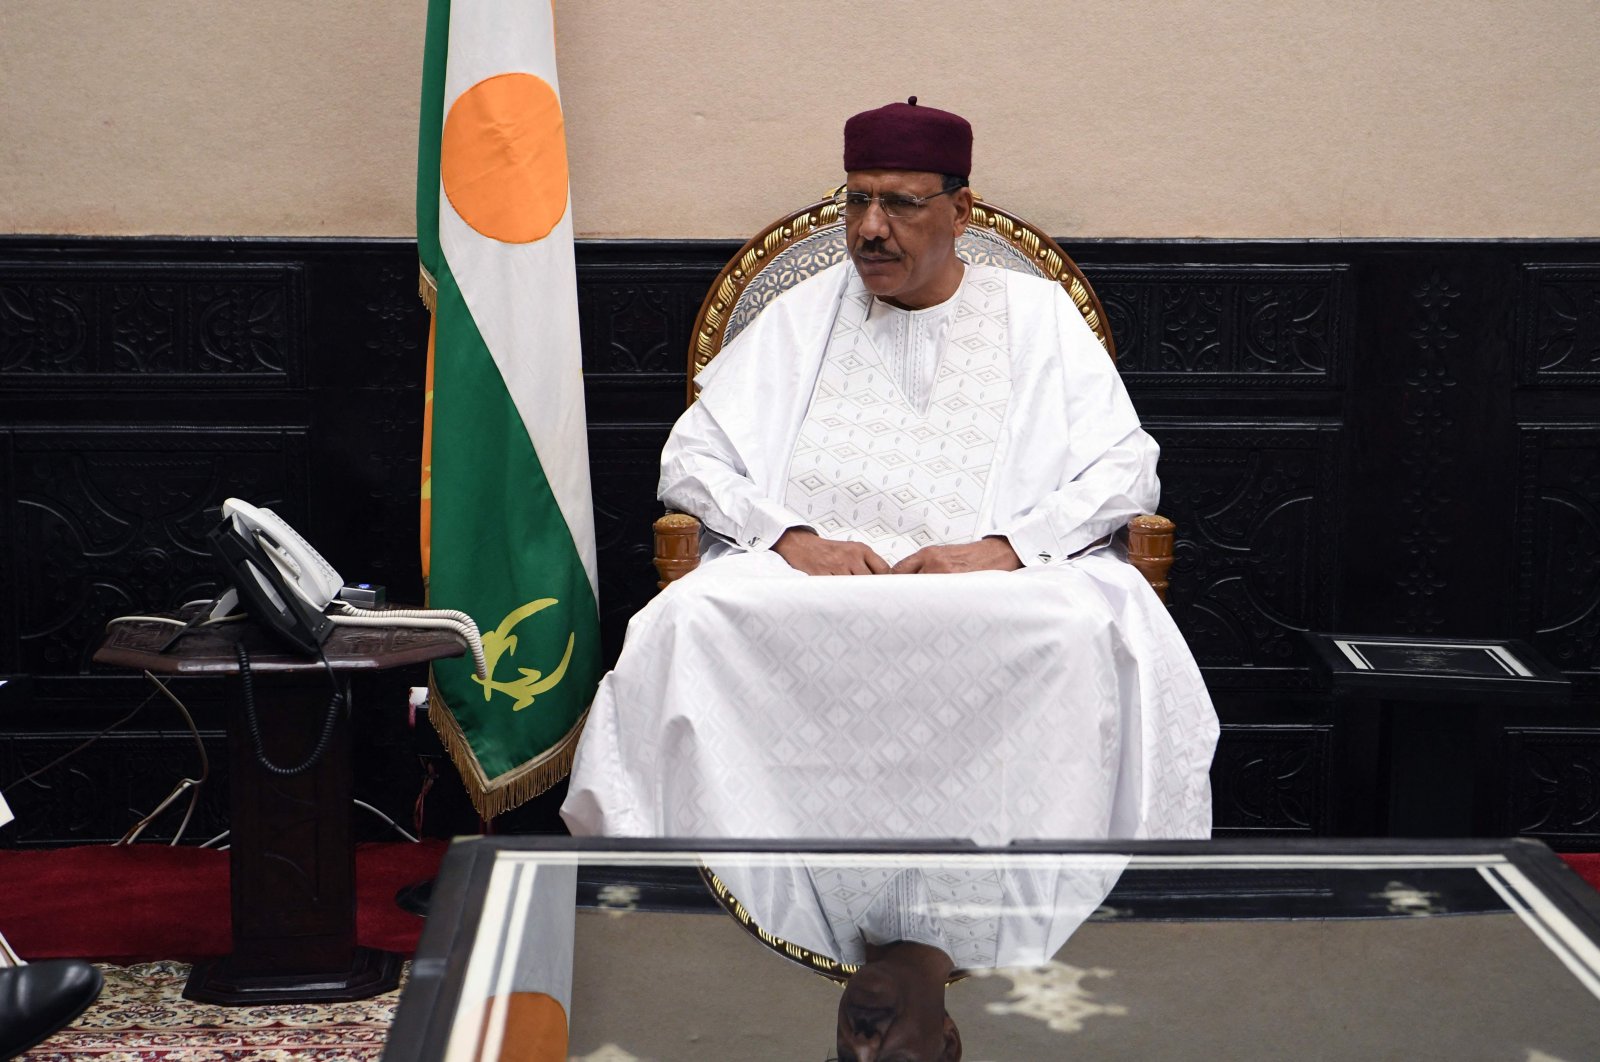 Niger president held in palace in suspected coup attempt